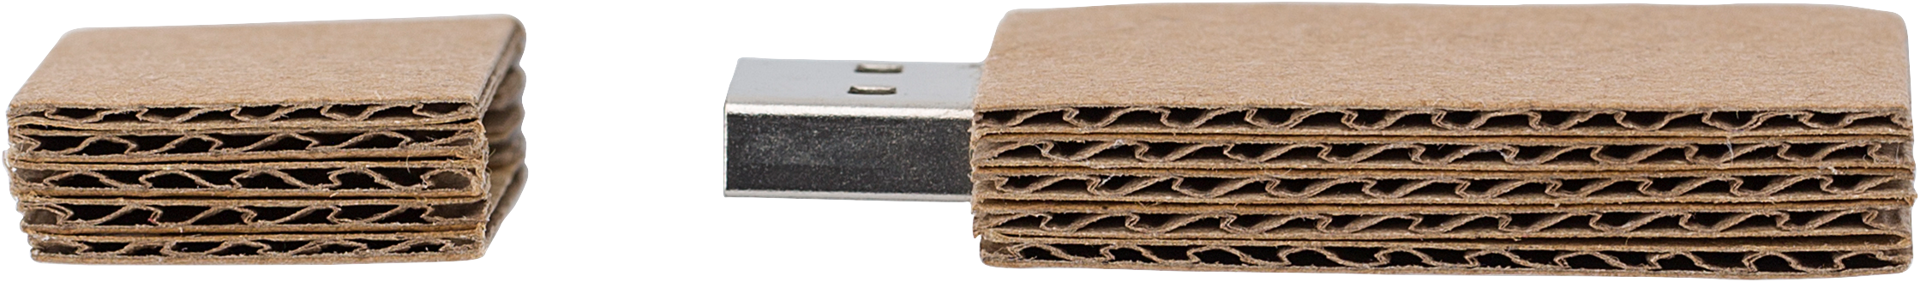 Cardboard USB Drive, light brown colour, viewed from a side angle with lid off. 